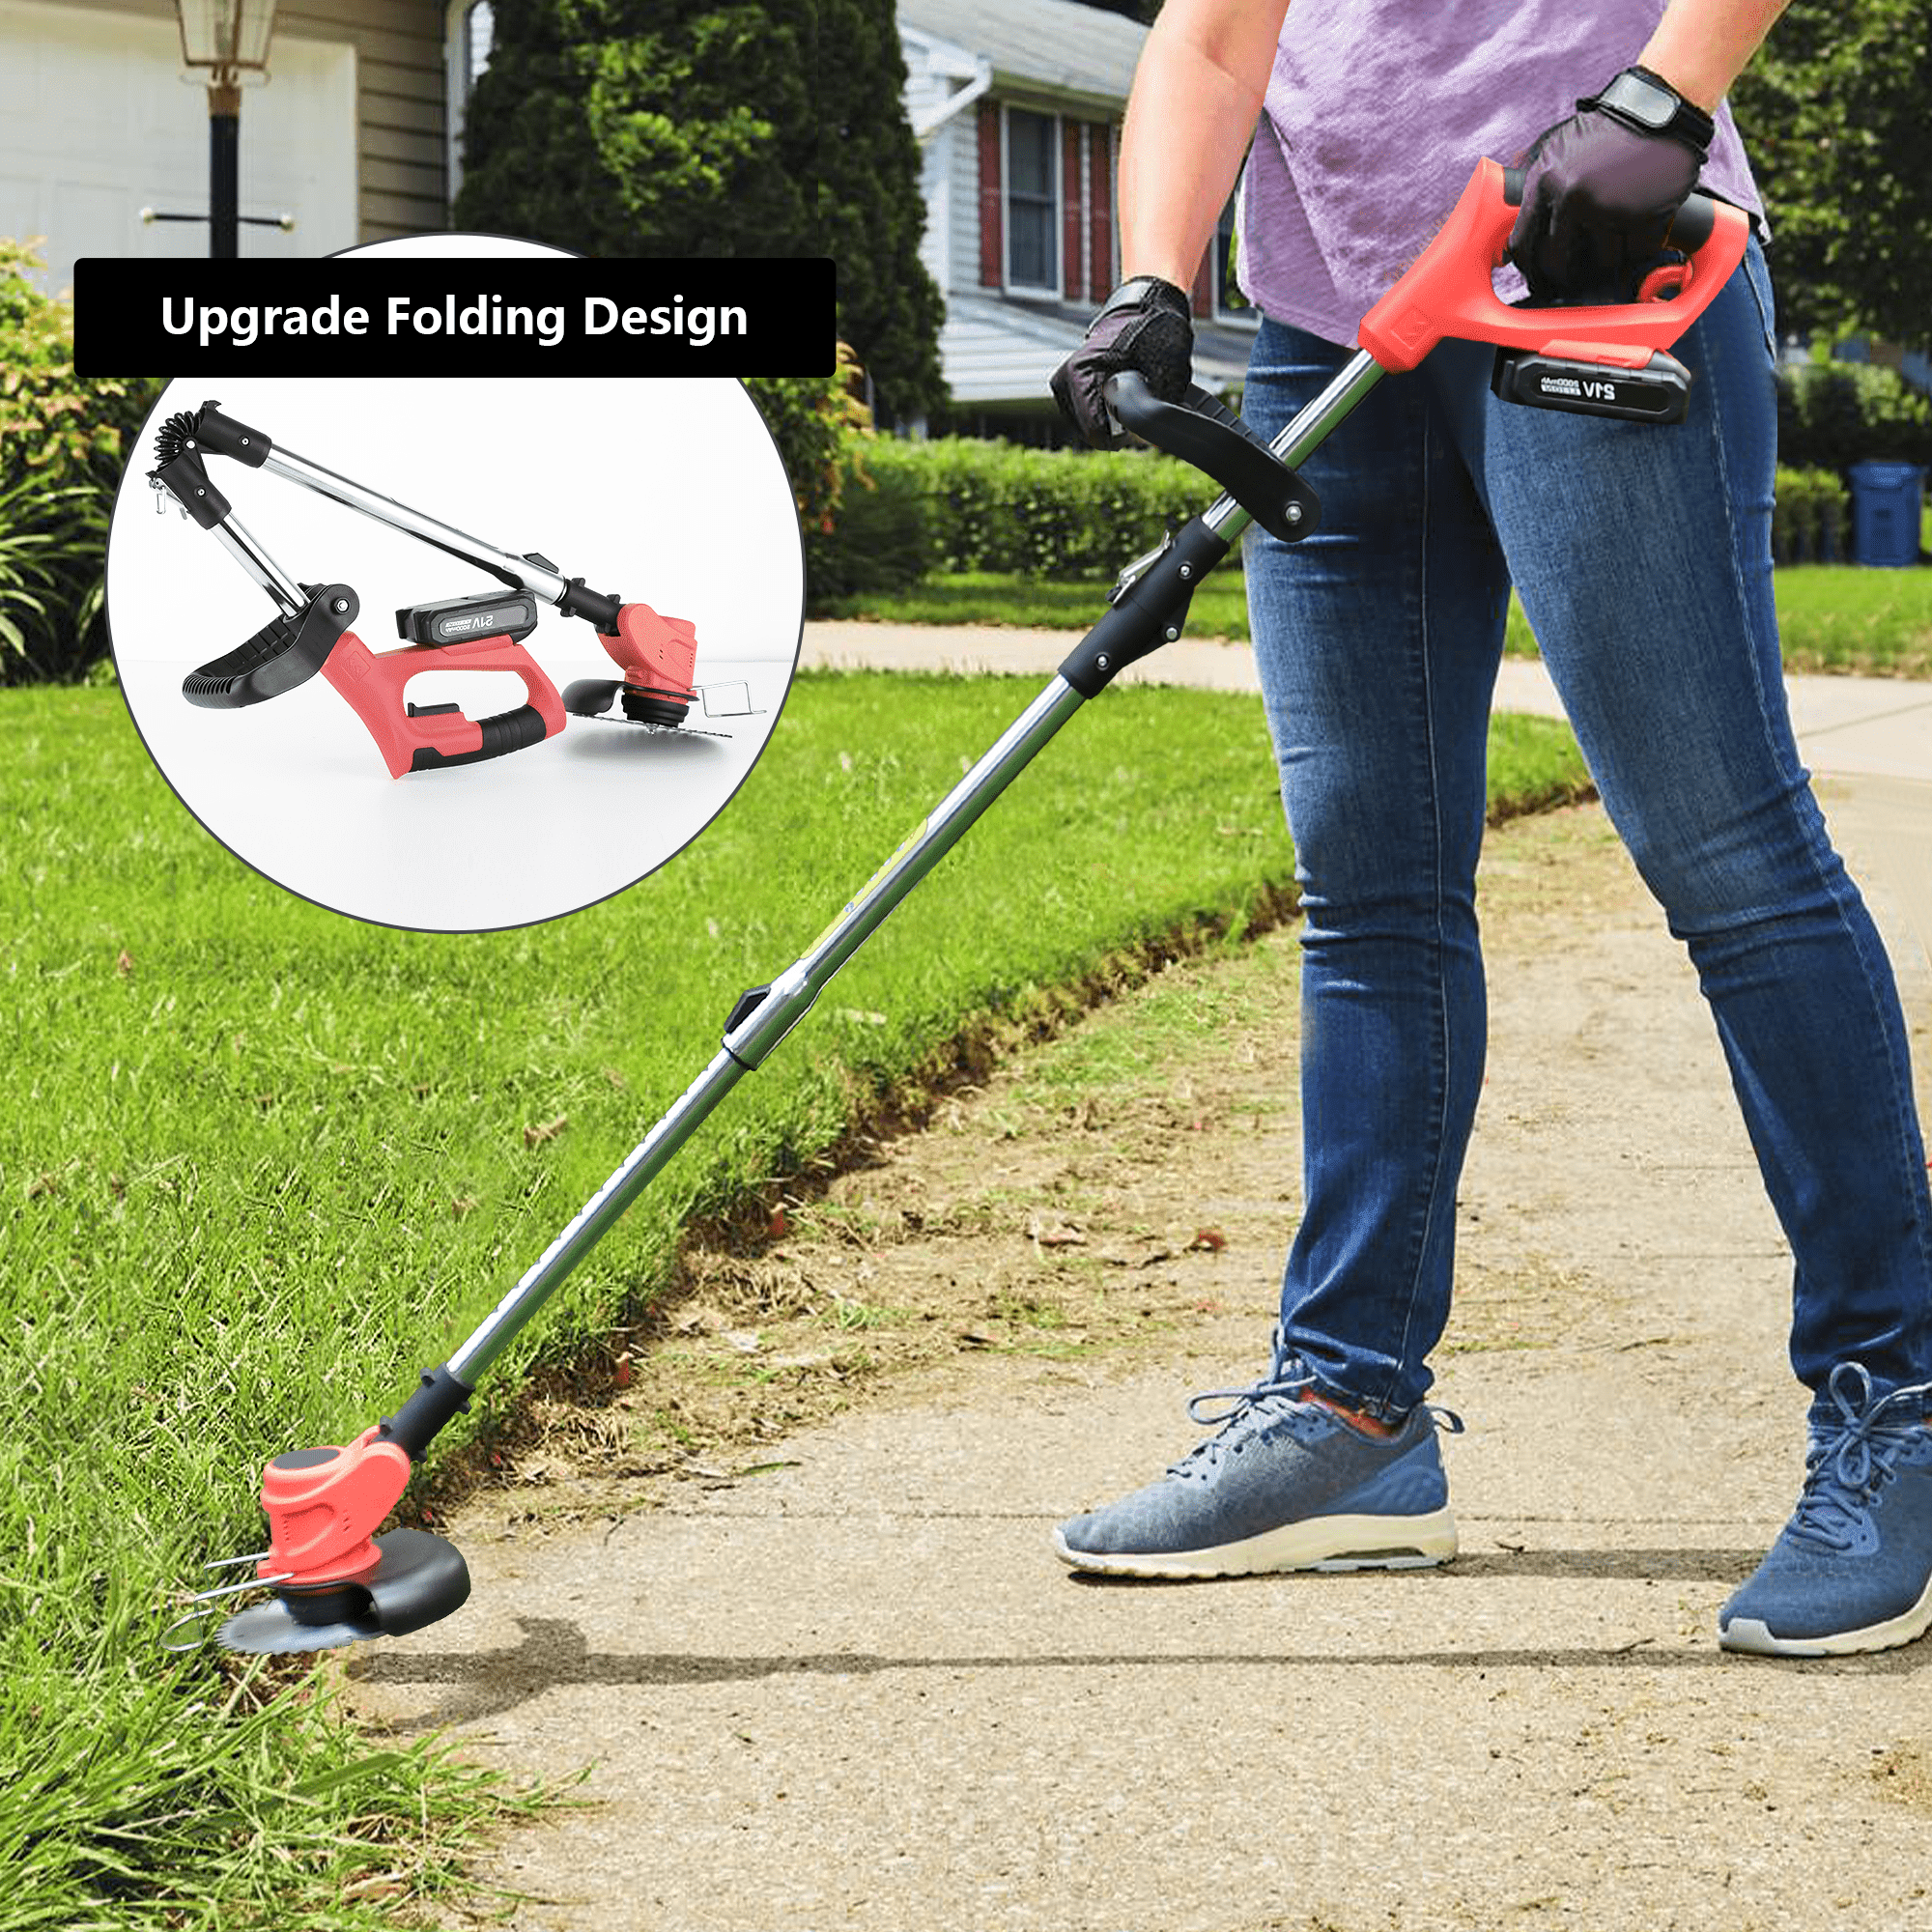  Cordless Trimmer Weed MowerTrimmer,Lightweight 3-IN-1 with  Edger Tool,Mower for Garden and Yard,3 Kinds of Blades,Liiion Battery ,21V  2Ah ,Red : Patio, Lawn & Garden